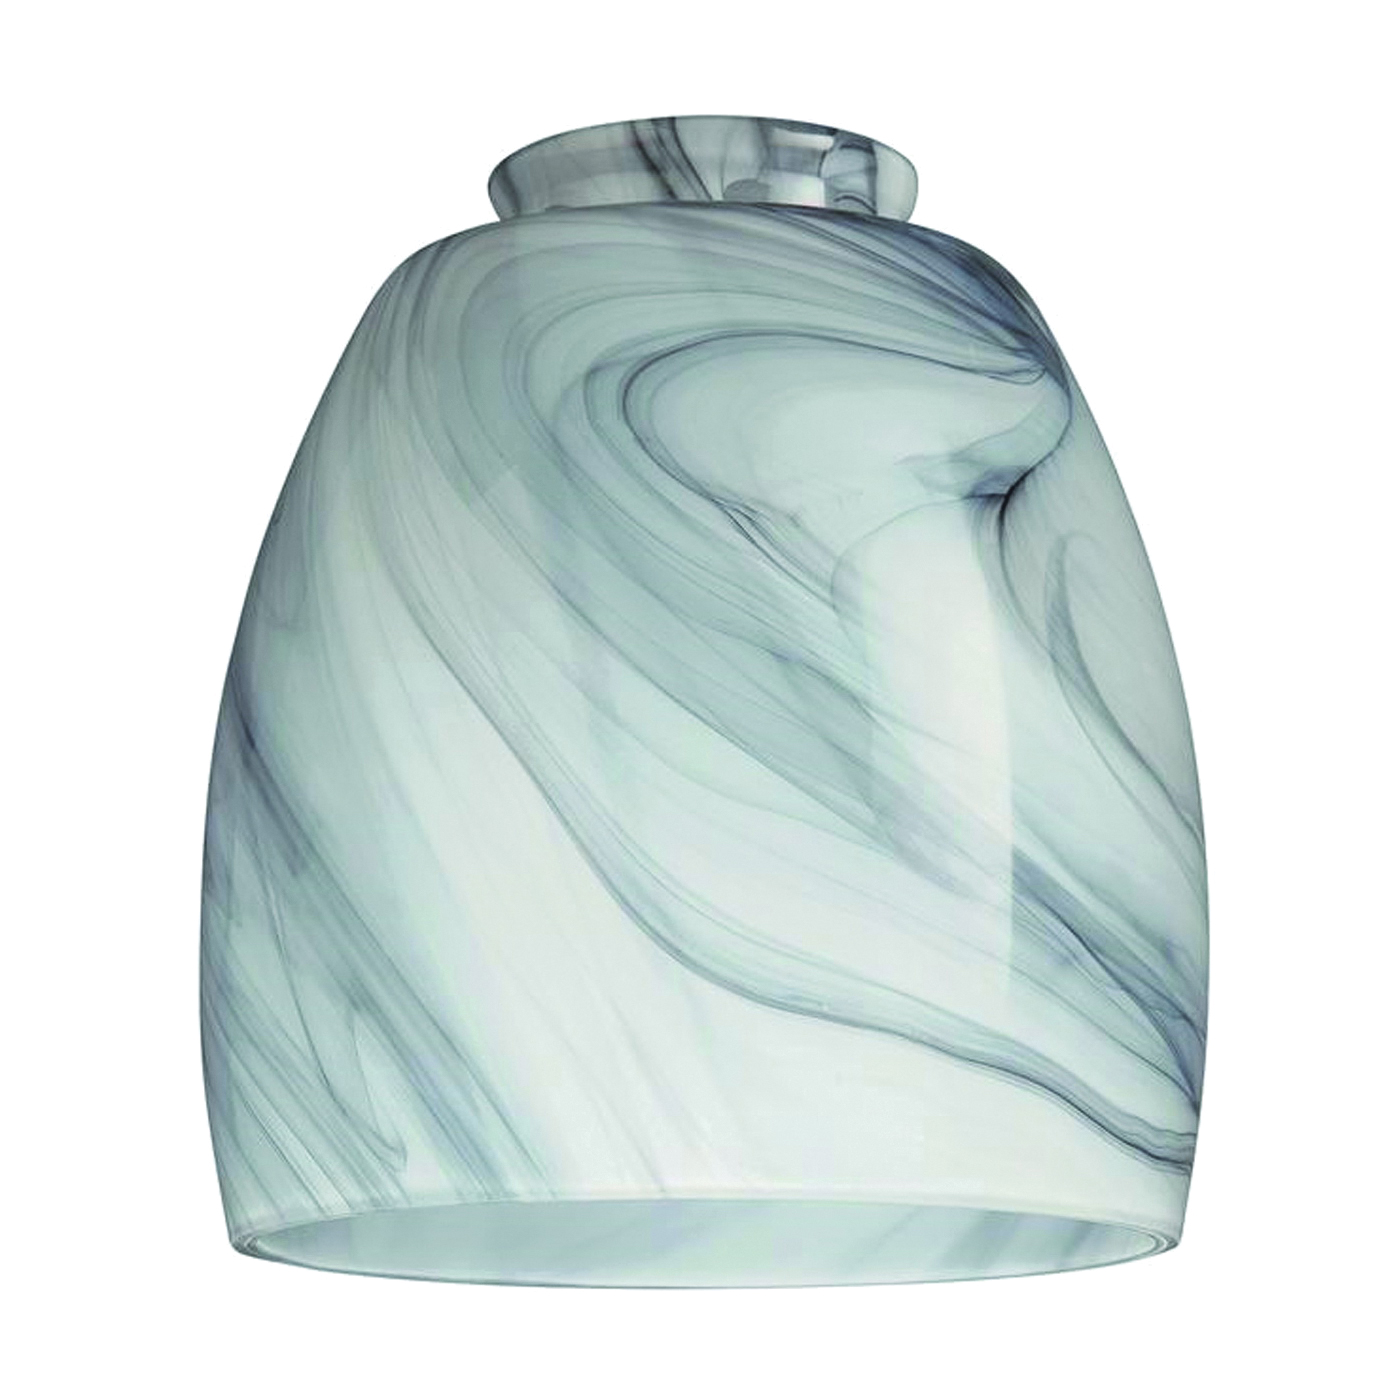 8140900 Light Shade, Tapered Barrel, Glass, Charcoal/White